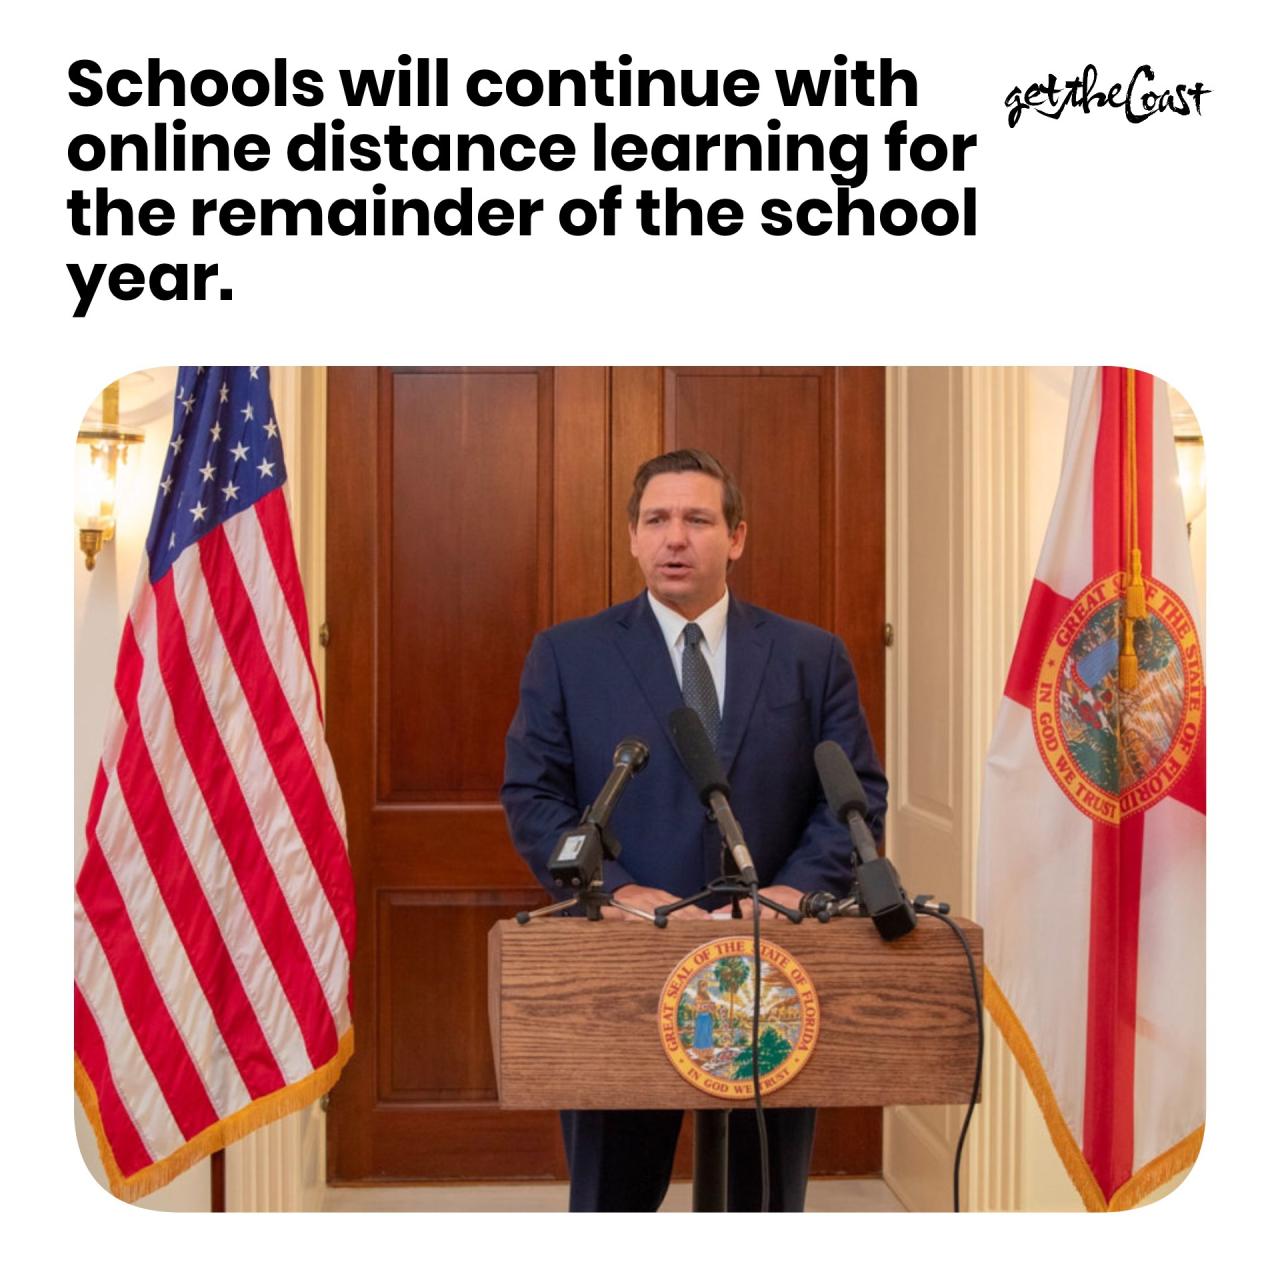 Governor DeSantis announced that schools will remain with online